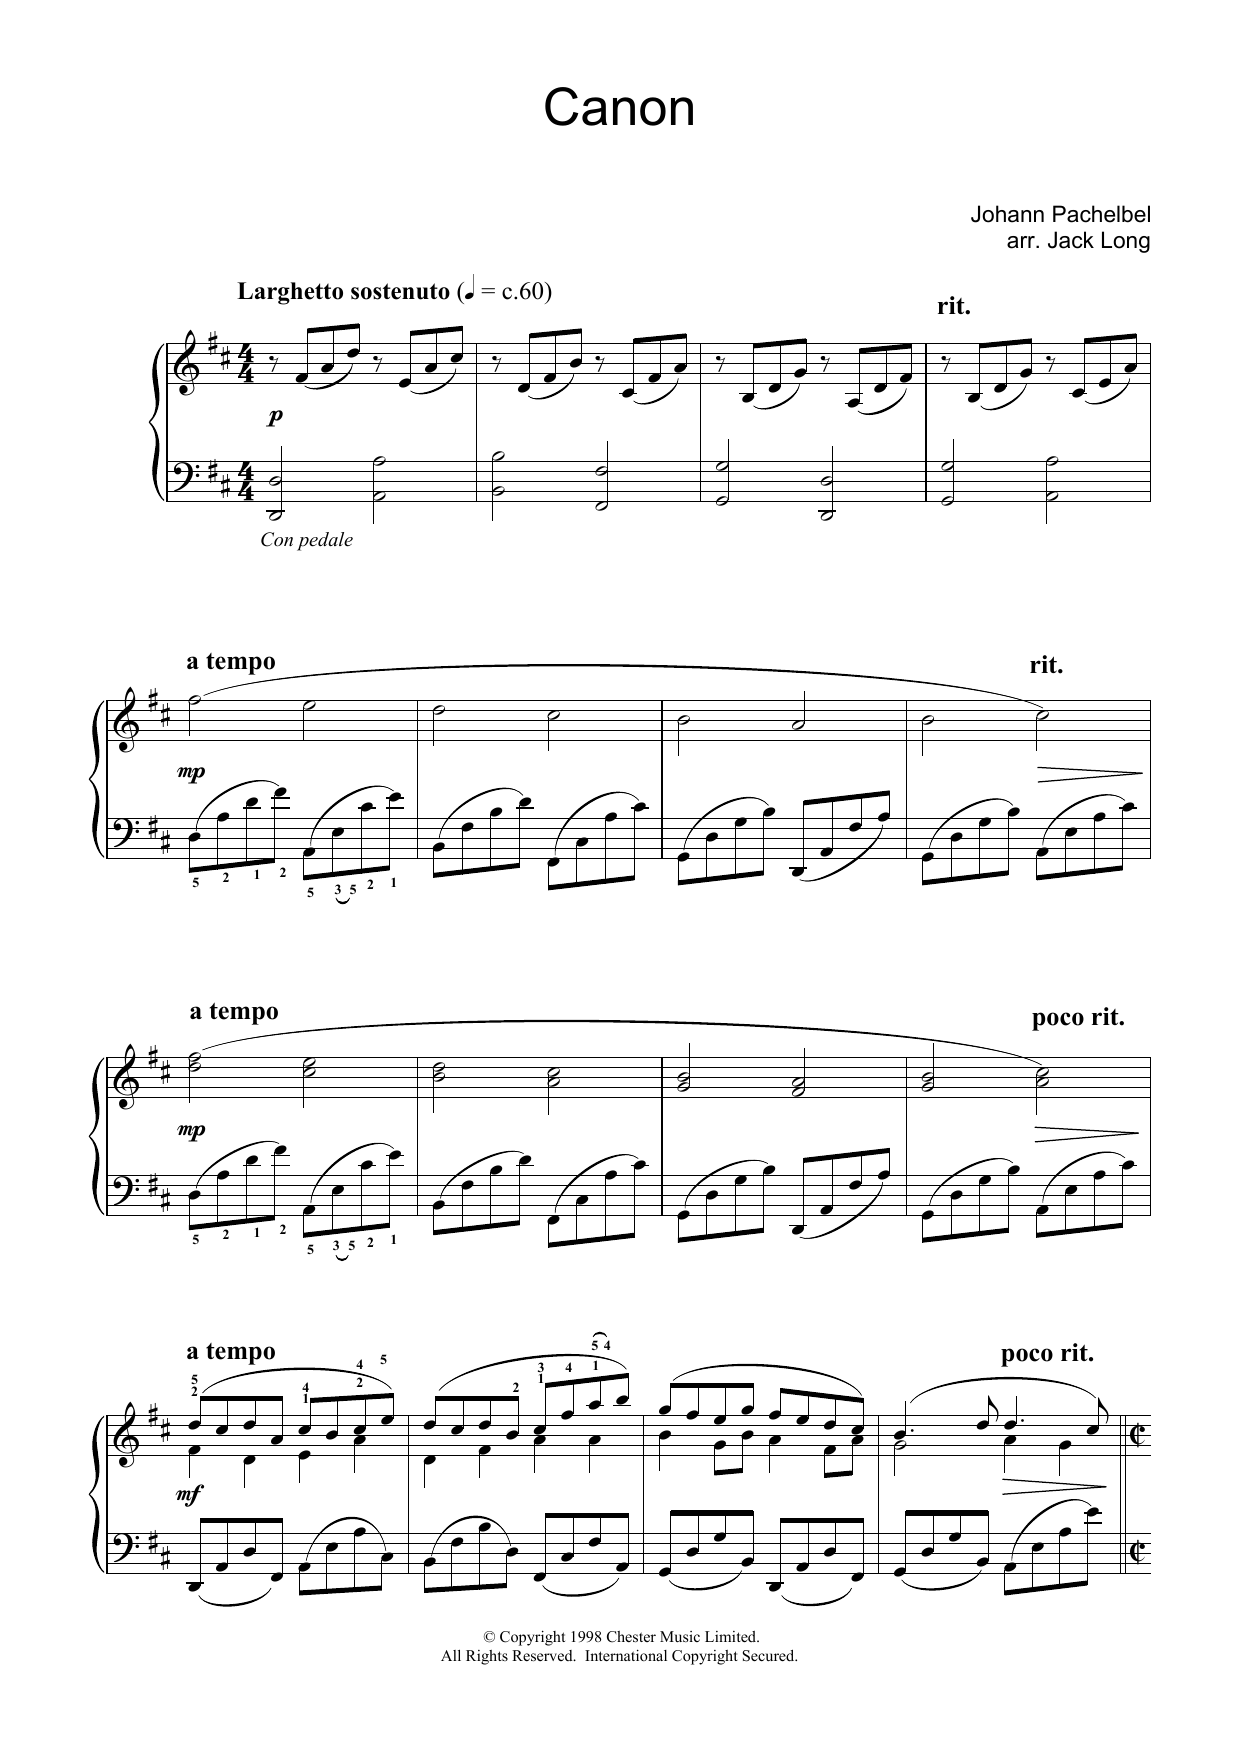 Johann Pachelbel Pachelbel's Canon In D Major sheet music notes and chords. Download Printable PDF.